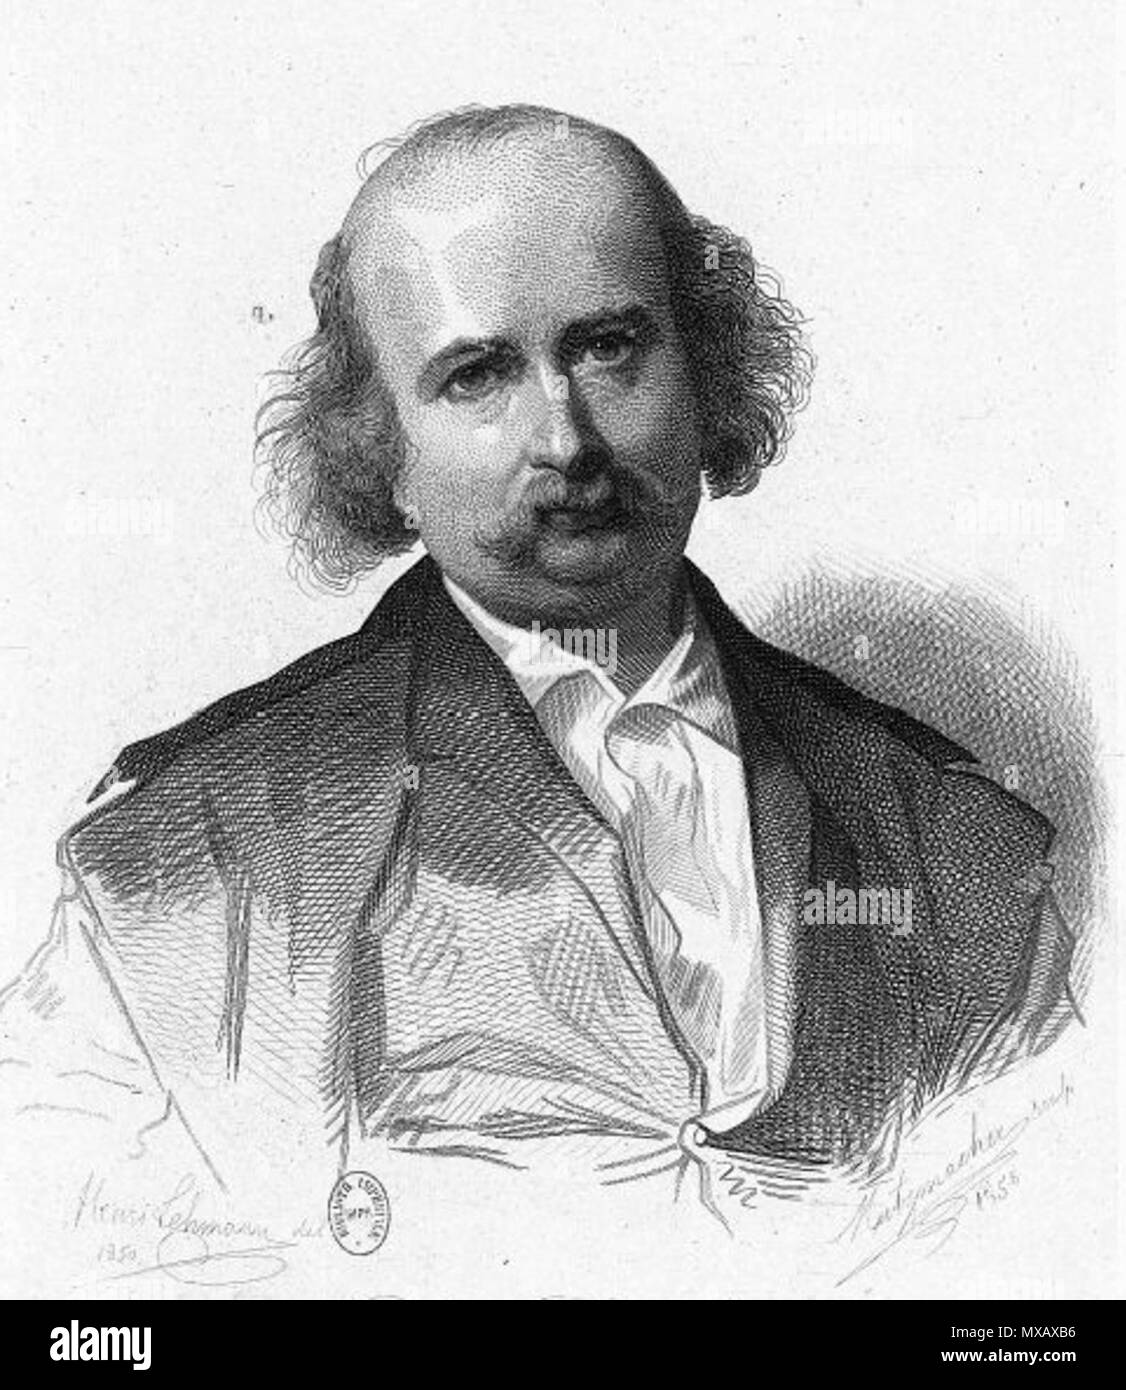 . Portrait of French writer and playwright Jules Sandeau (1811-1883) by Pierre Guillaume Metzmacher or Émile Pierre Metzmacher after Henri Lehmann (1814-1882) . 1858. Metzmacher after Henri Lehmann 329 Jules Sandeau by Henri Lehmann Stock Photo